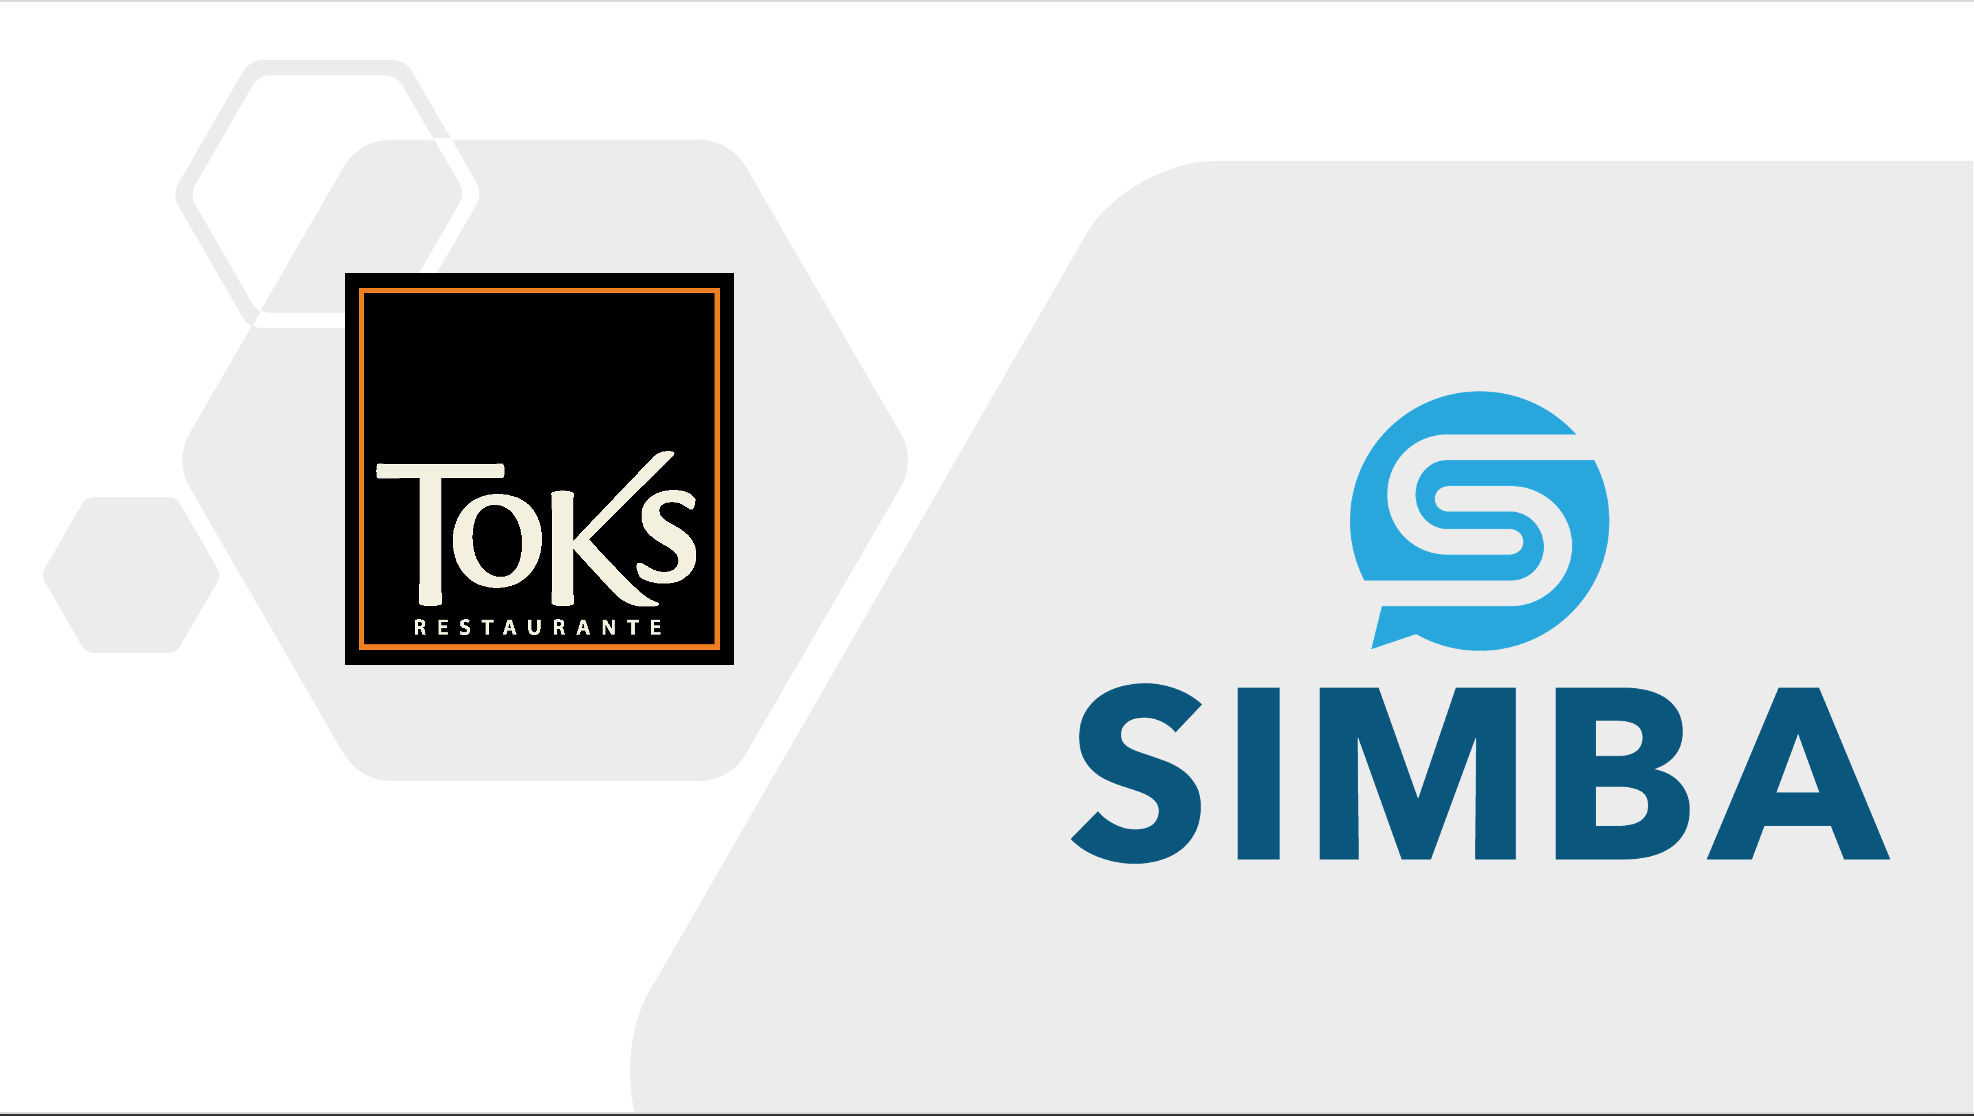 In Redefining the Coffee Supply Chain with Blockchain, Mexico’s Restaurantes Toks Is Transforming the Lives of Small Growers with SIMBA Chain